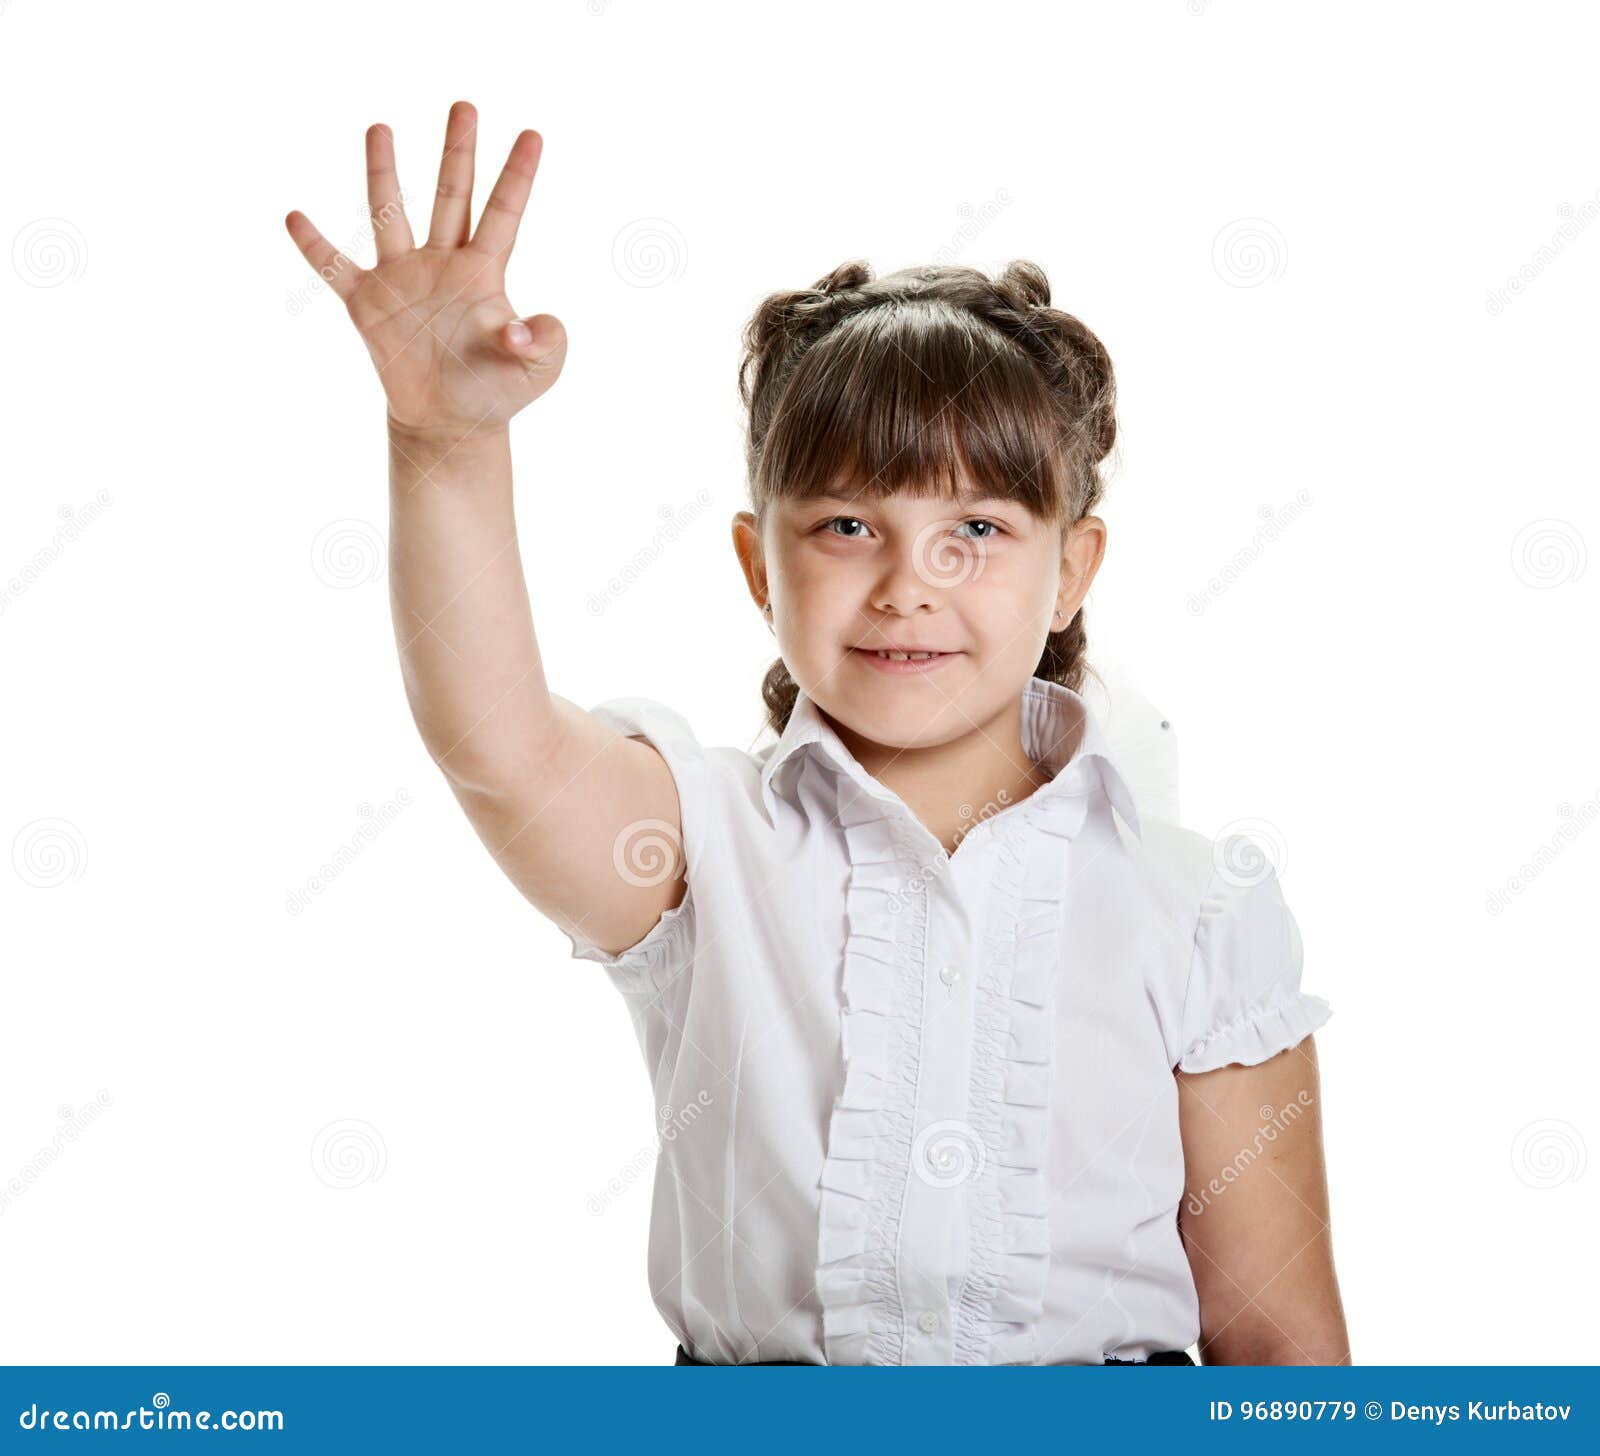 All 100+ Images why are kids holding up 4 fingers in pictures Sharp